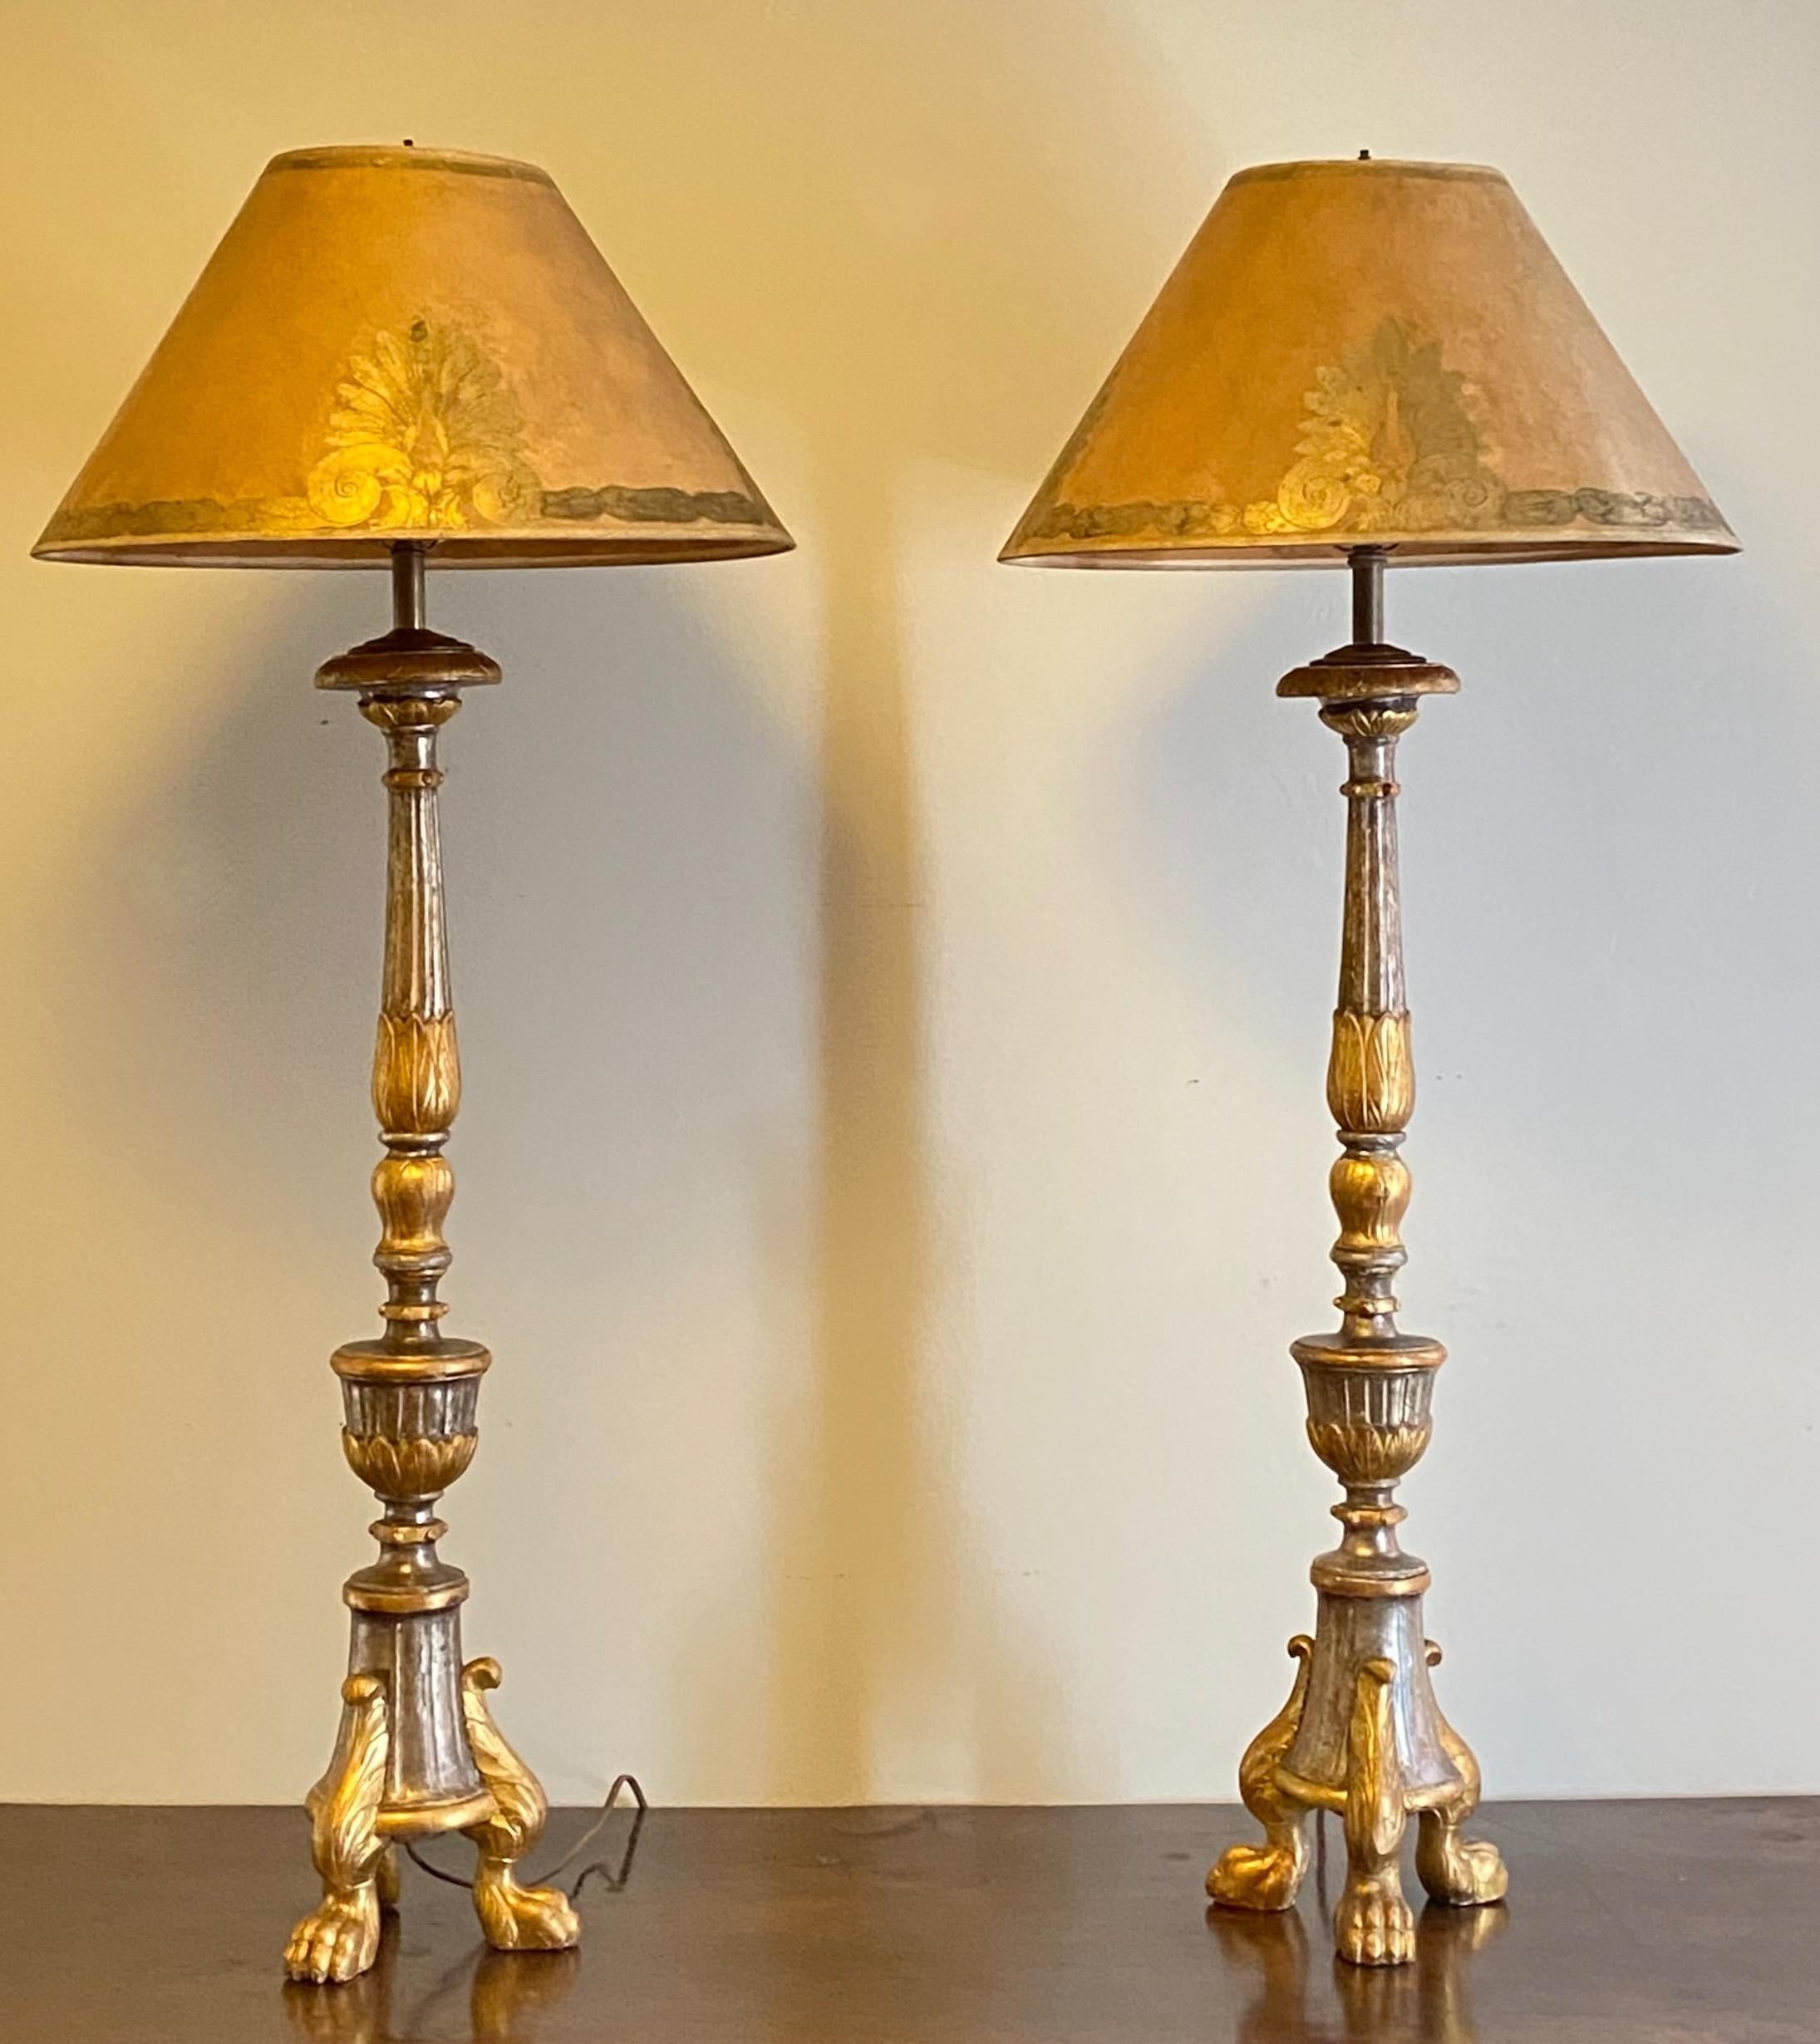 A pair of tall silver and gold gilt candle sticks professionally converted to table lamps.
Hand carved with beautifully contrasted silvered and gold gilt. These have weighted bases so they are stable and sturdy. In remarkable antique